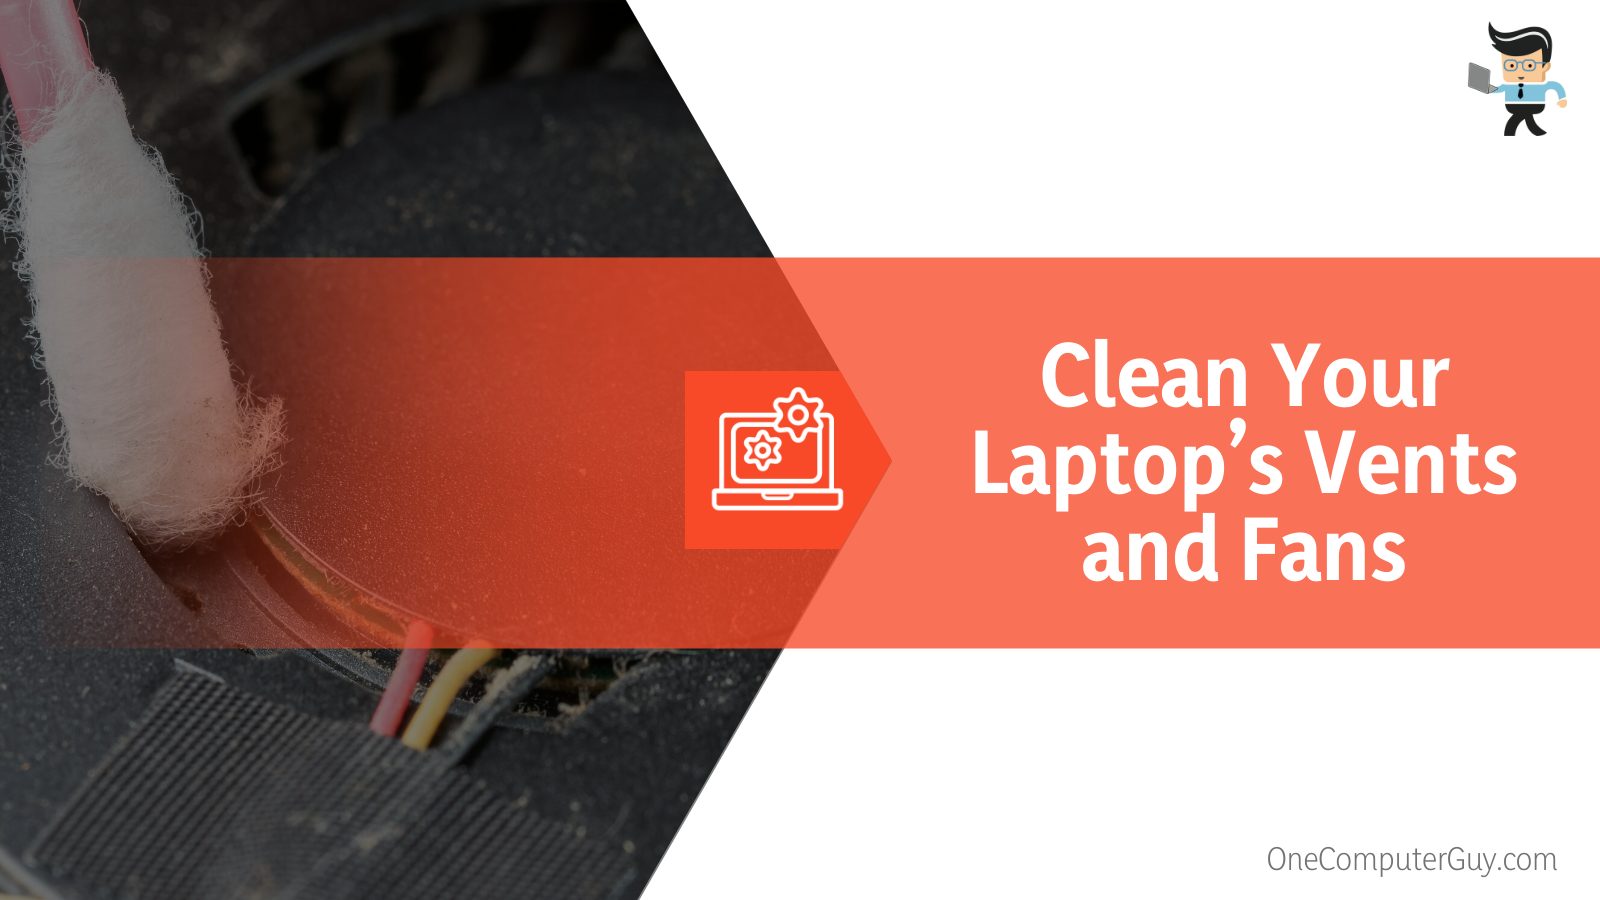 Clean Your Laptop’s Vents and Fans